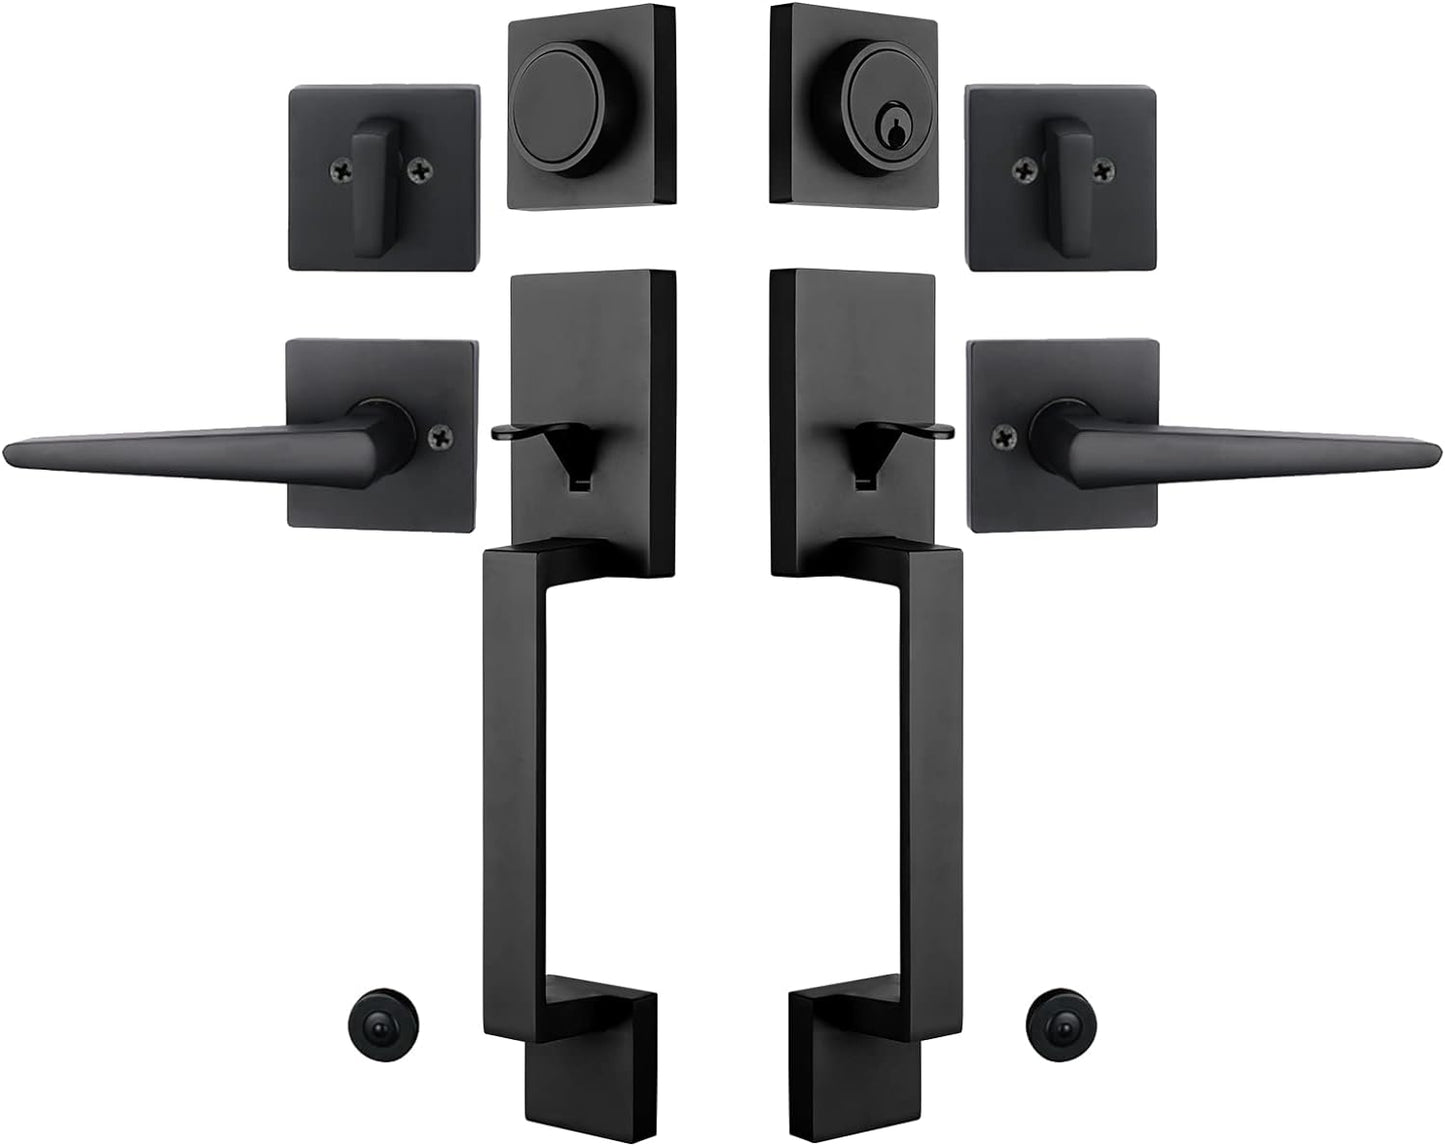 NEWBANG Front Double Door Traditional Style Keyed Entry Door Handleset with Lever Handle in Matte Black,(Keyed and Dummy Set),MDHST2010DB-SET-BR-TMC